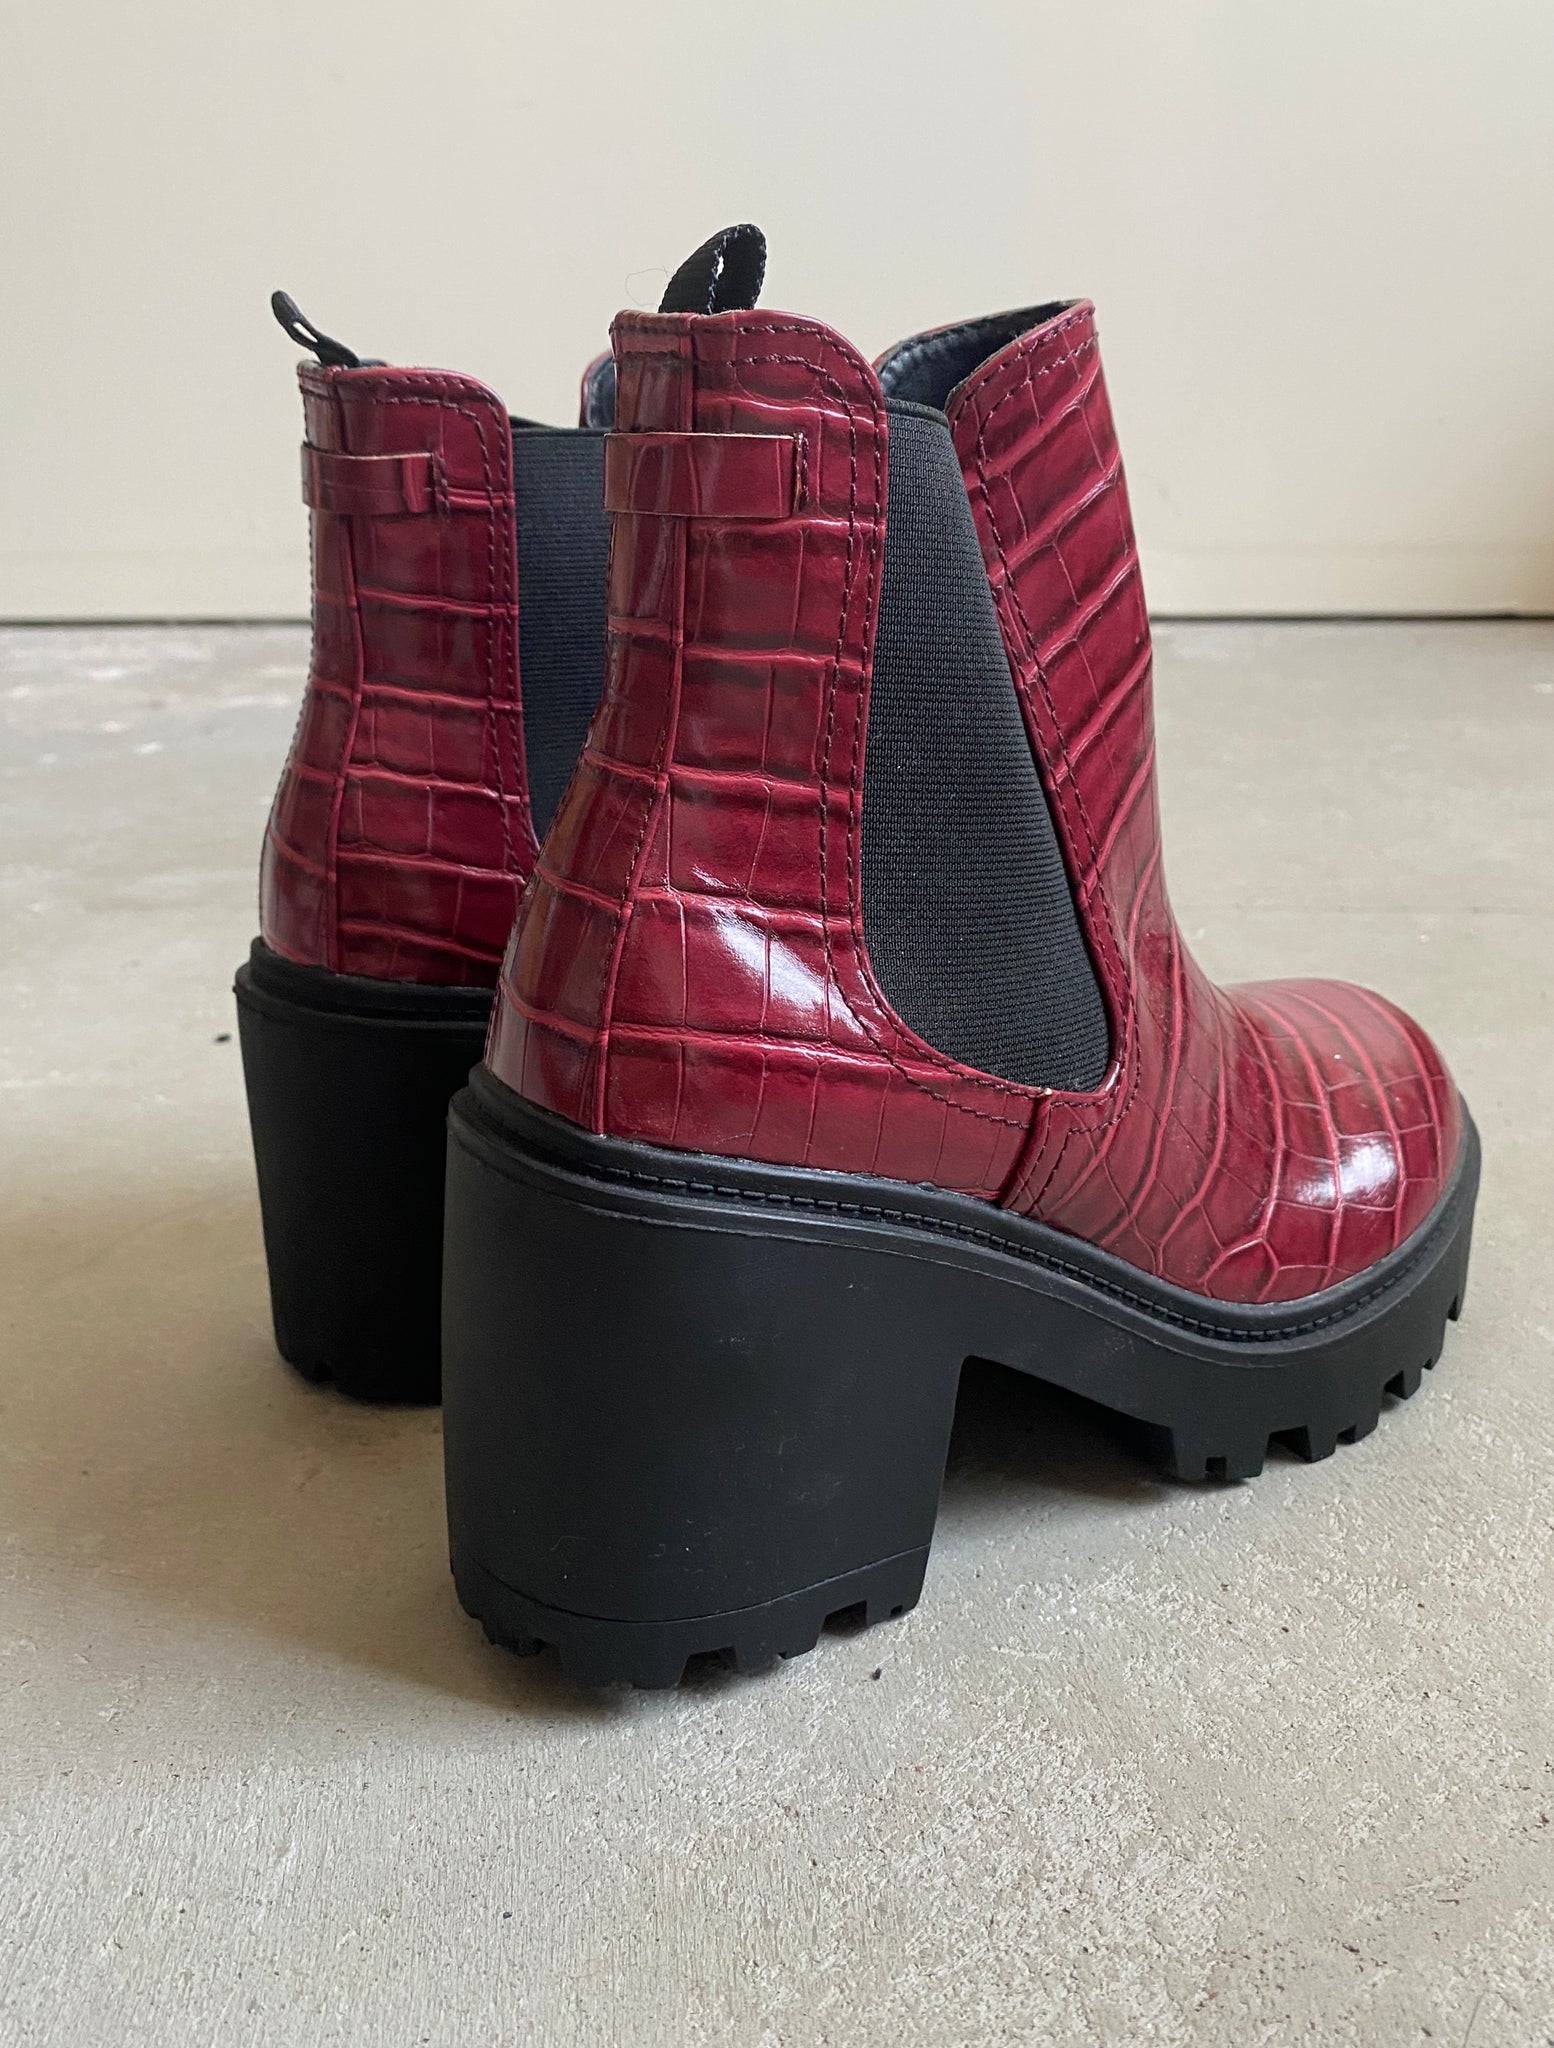 Urban Outfitters Red and Black Platform Boots (U.S. Women 10M)